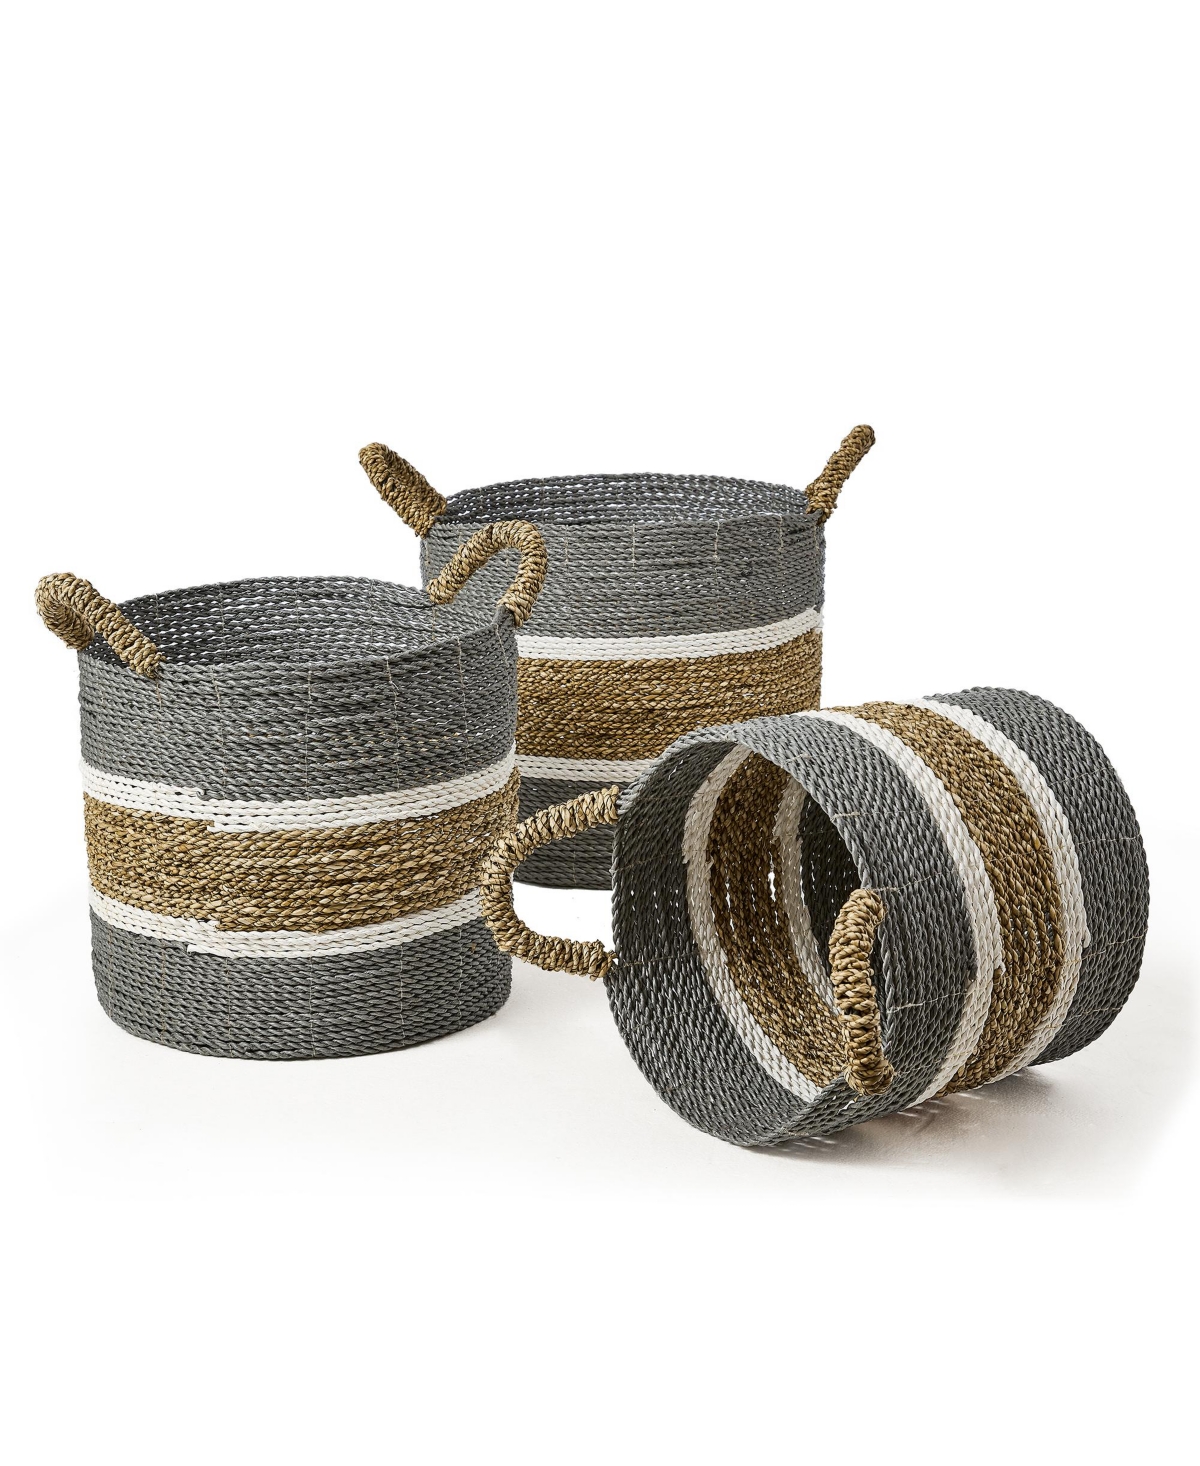 3 Piece Round Sea Grass and Raffia Basket Set with Ear Handles - Gray and Tan